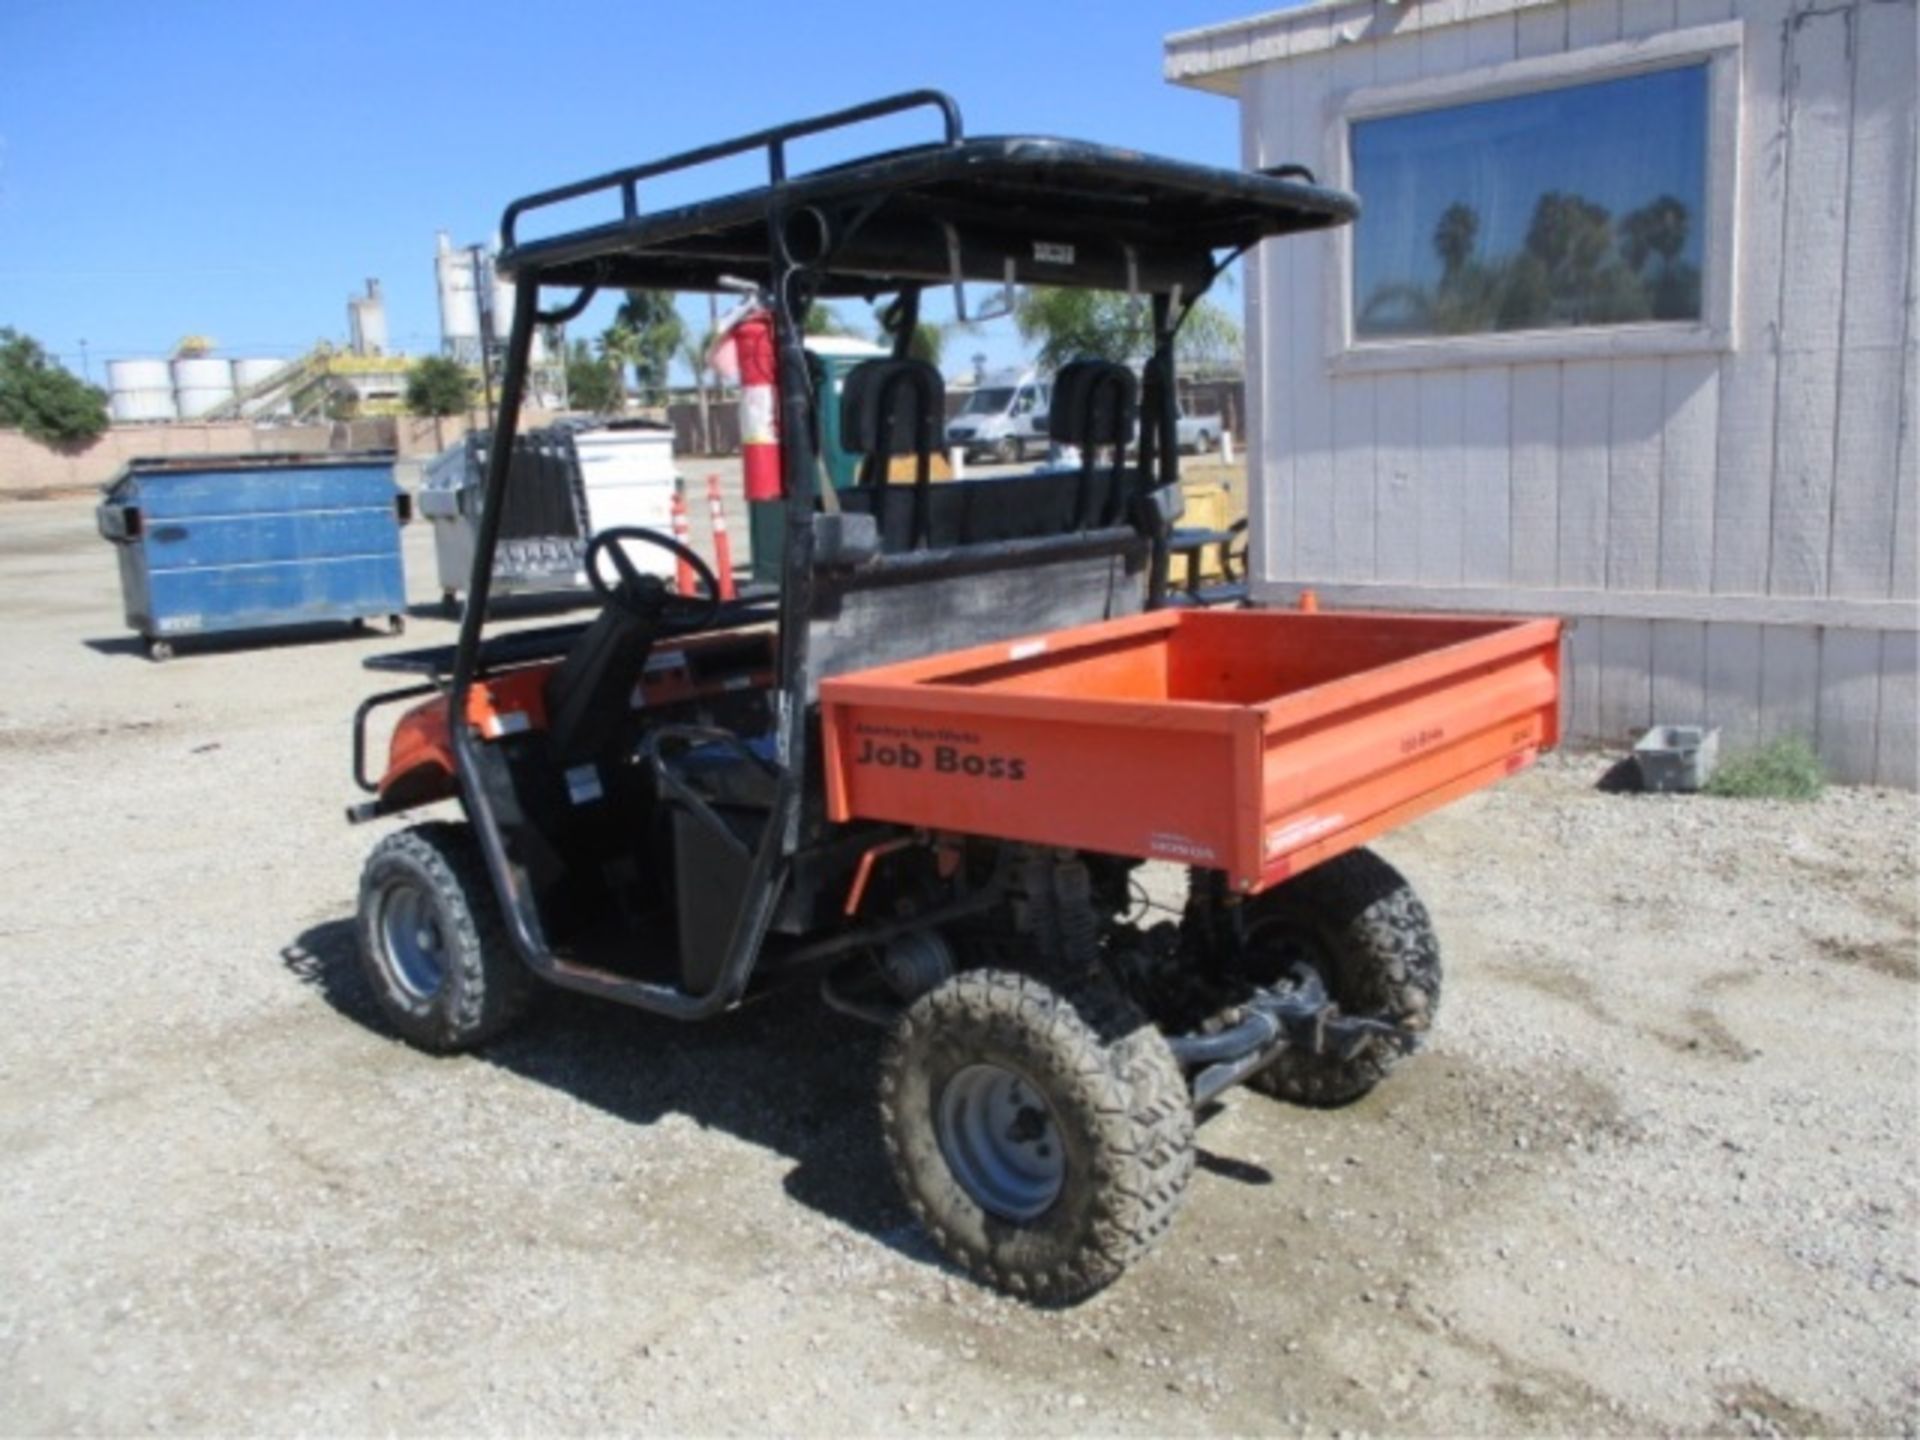 2008 American Sportworks Job Boss Utility Cart, Honda Gas, Rear Metal Dump Bed, Canopy, Tow Hitch, - Image 18 of 50